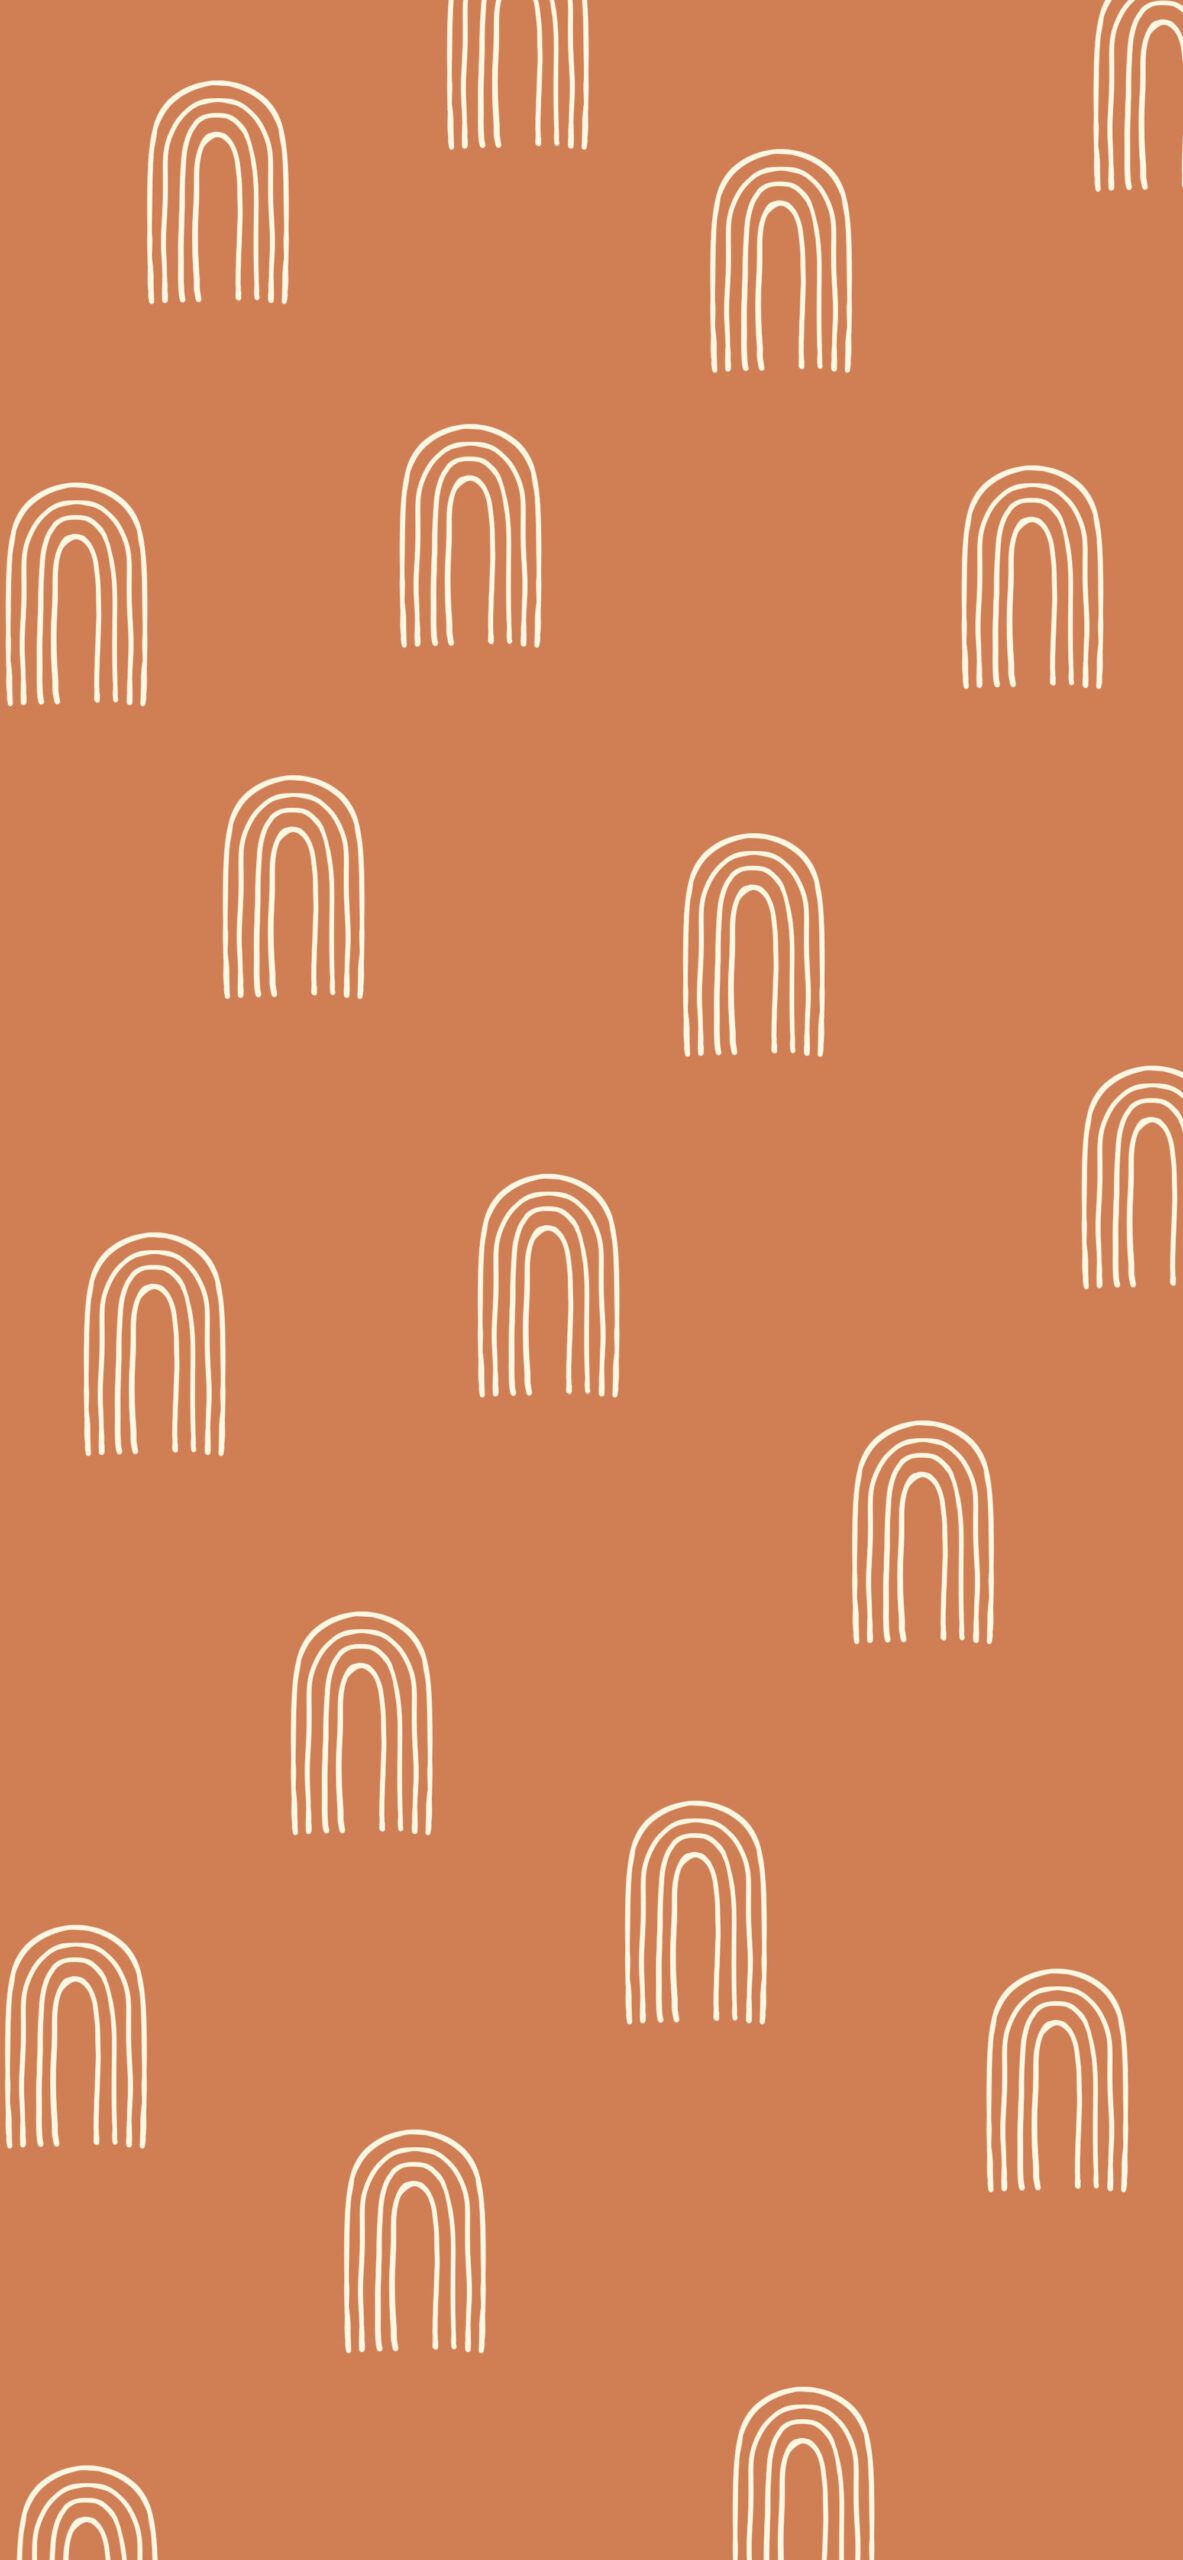 A pattern of white lines on an orange background - Terracotta, pattern